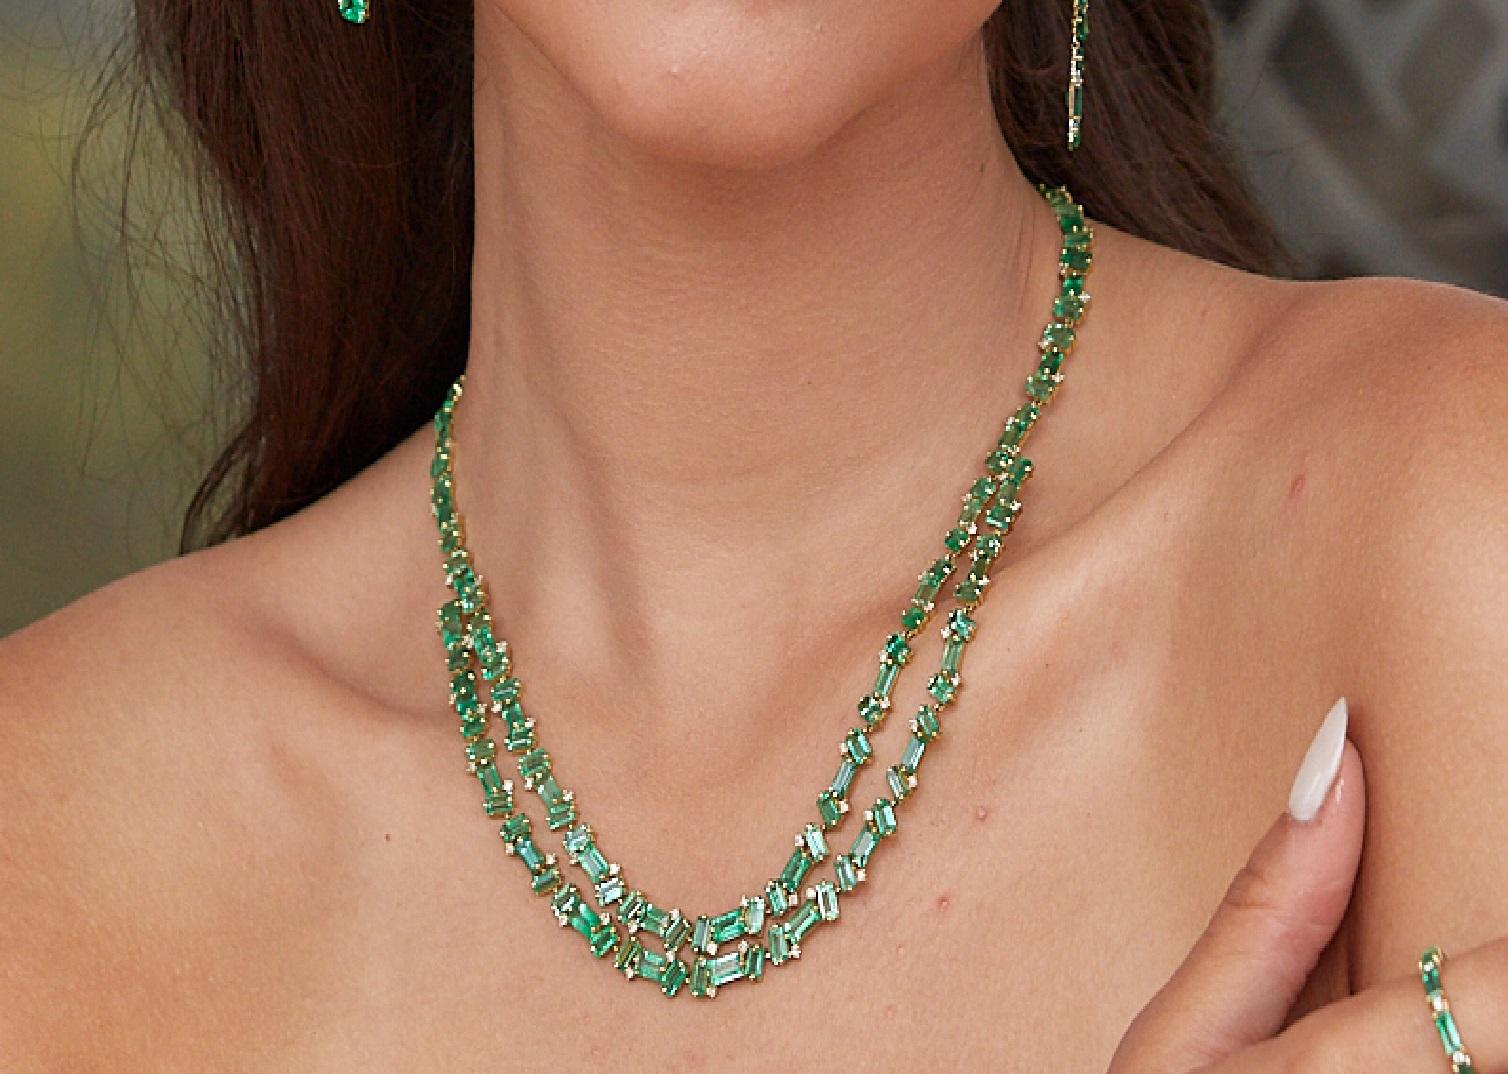 Tresor Beautiful Necklace feature 36.18 total carats of Emerald & 1.44 carats of Diamond. The Necklace is an ode to the luxurious yet classic beauty with sparkly gemstones and feminine hues. Their contemporary and modern design make them perfect and